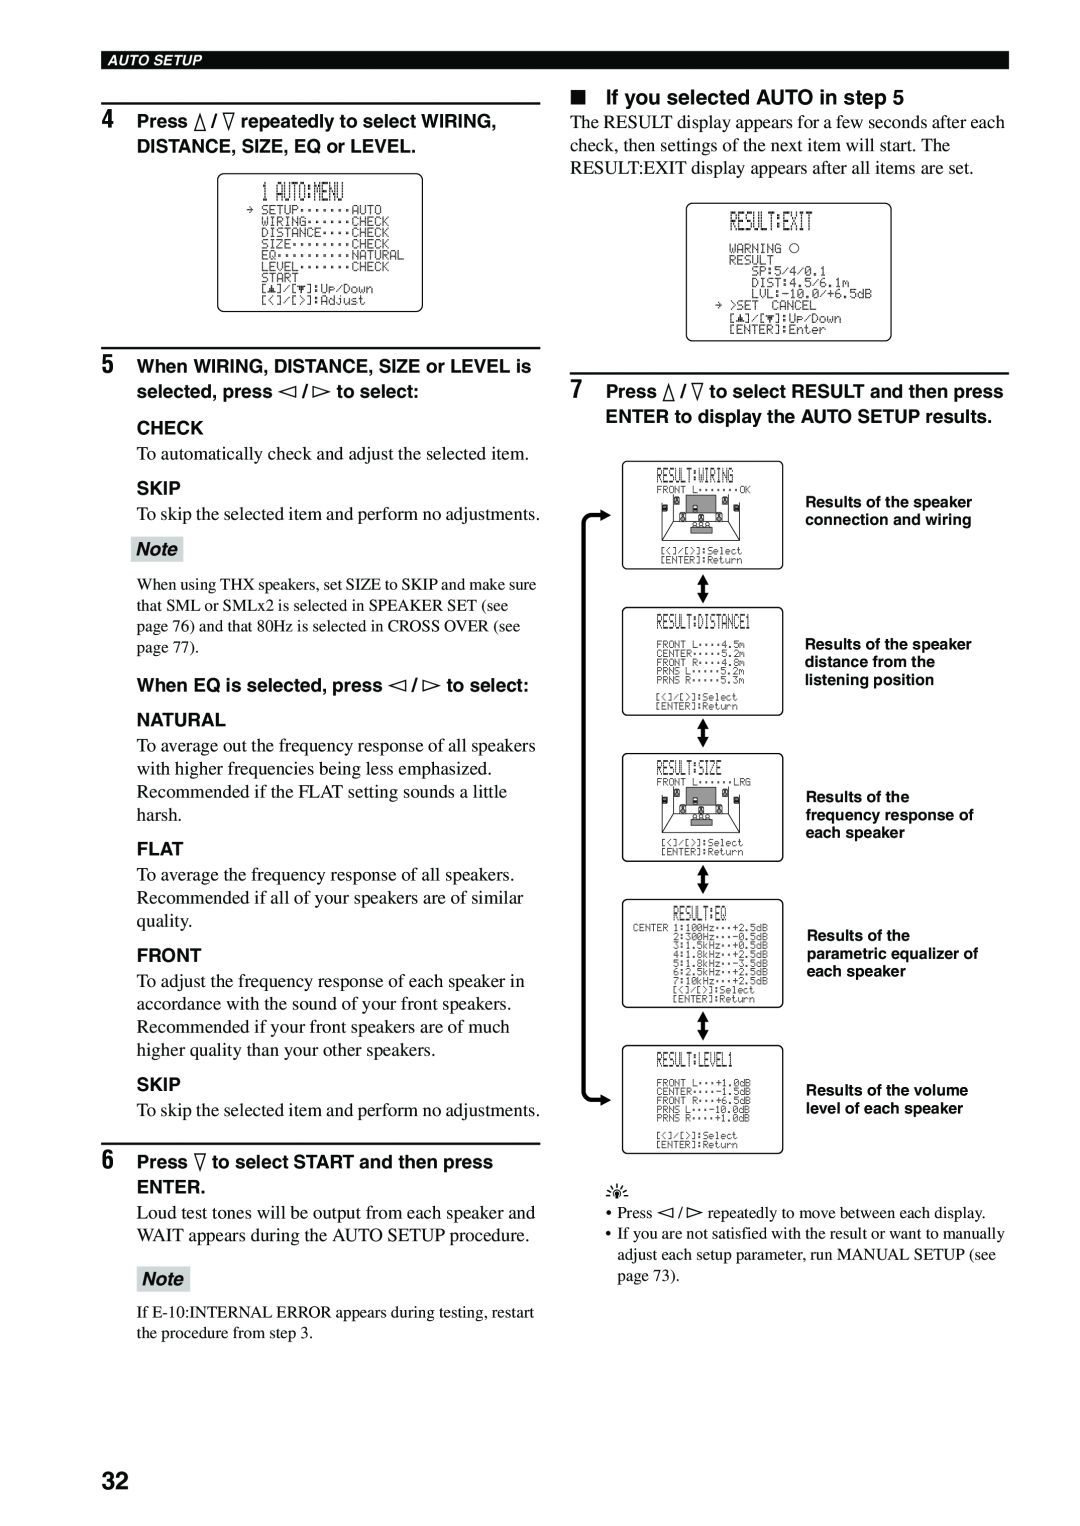 Yamaha HTR-5990 owner manual Auto:Menu, Result Exit, If you selected AUTO in step, Result:Wiring, Result:Size, Result Eq 